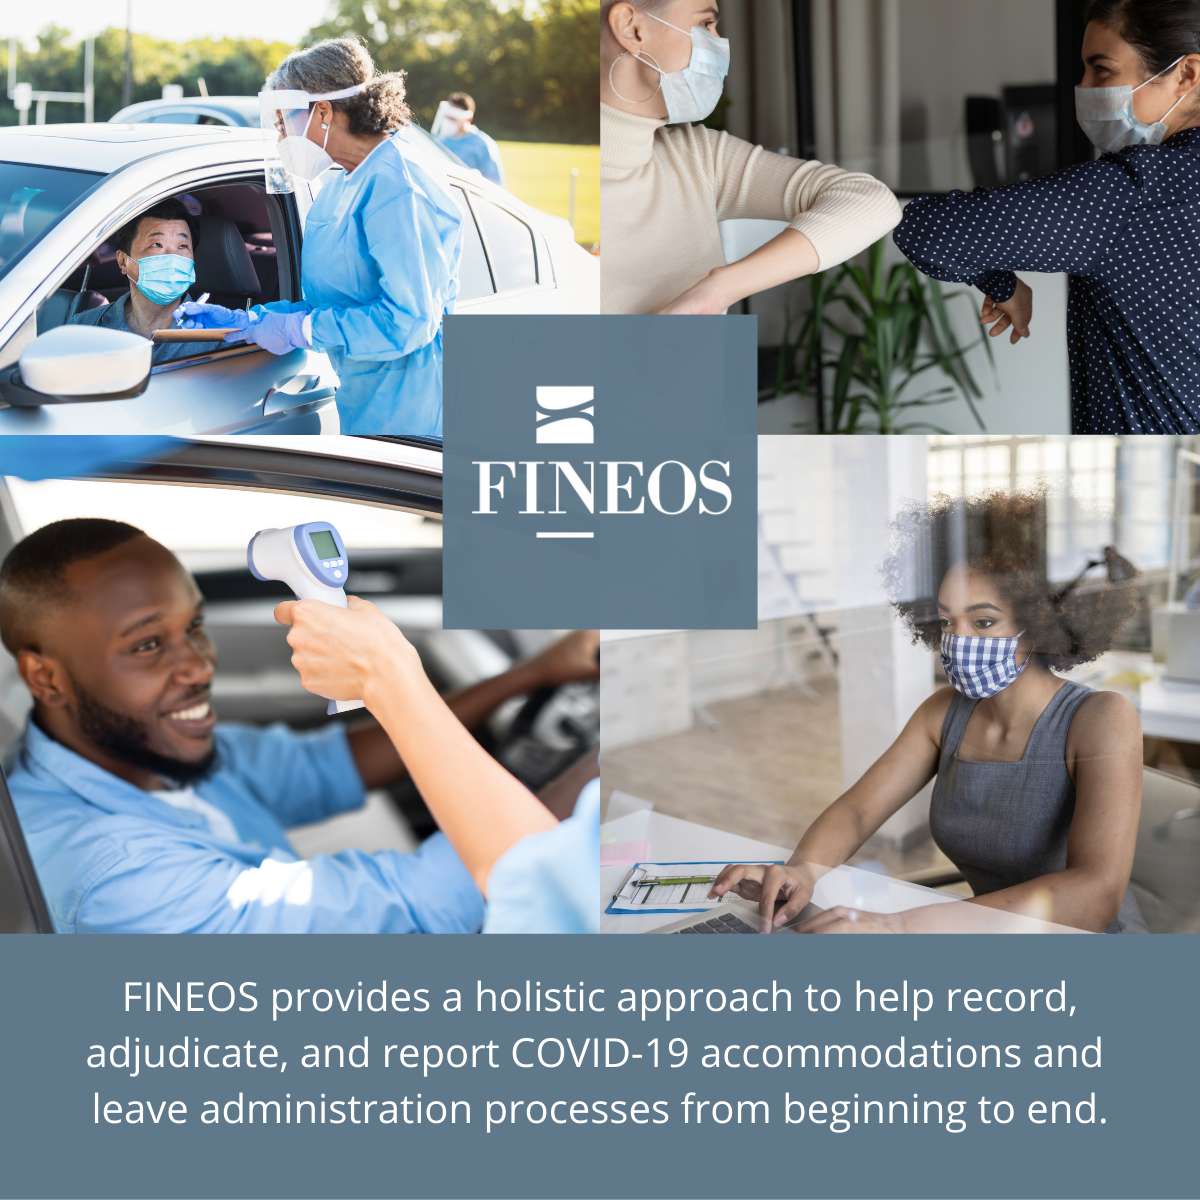 Employee Benefit Insurance Carriers Meet COVID Vaccination Accommodation Requests with the FINEOS Integrated Disability and Absence Management (IDAM) Solution